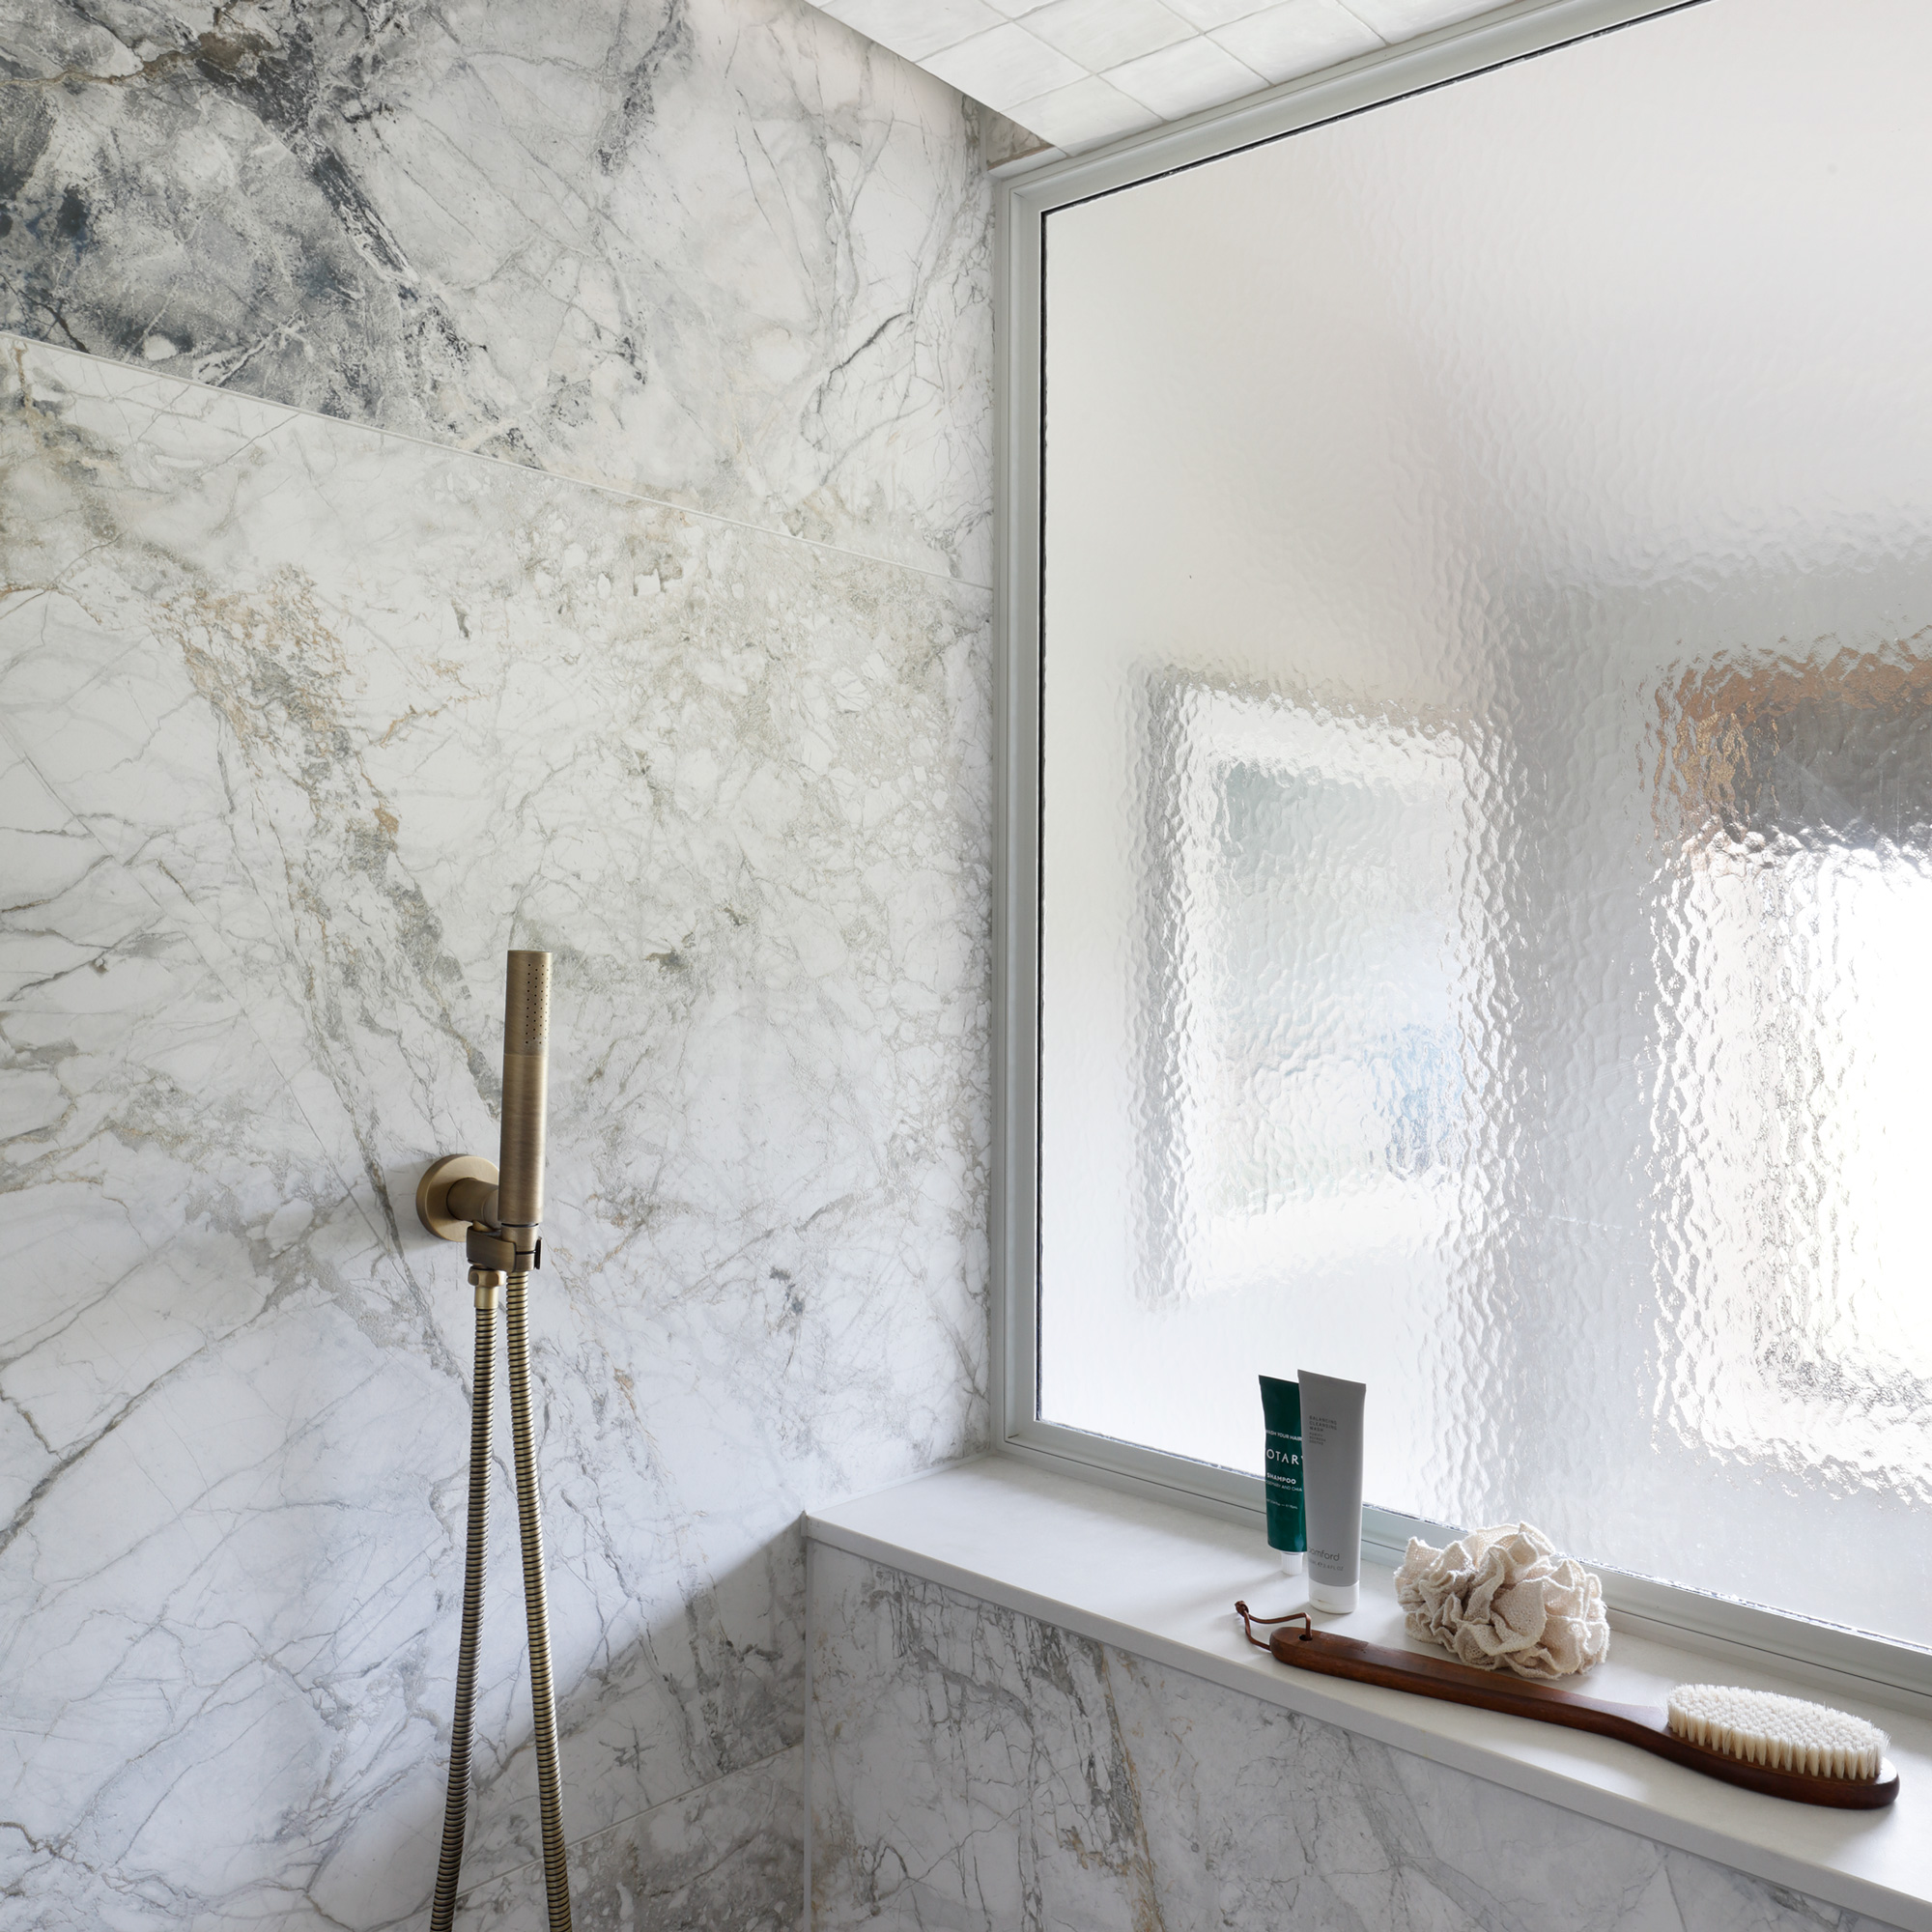 a glass internal window in a shower space providing light in an otherwise dark space